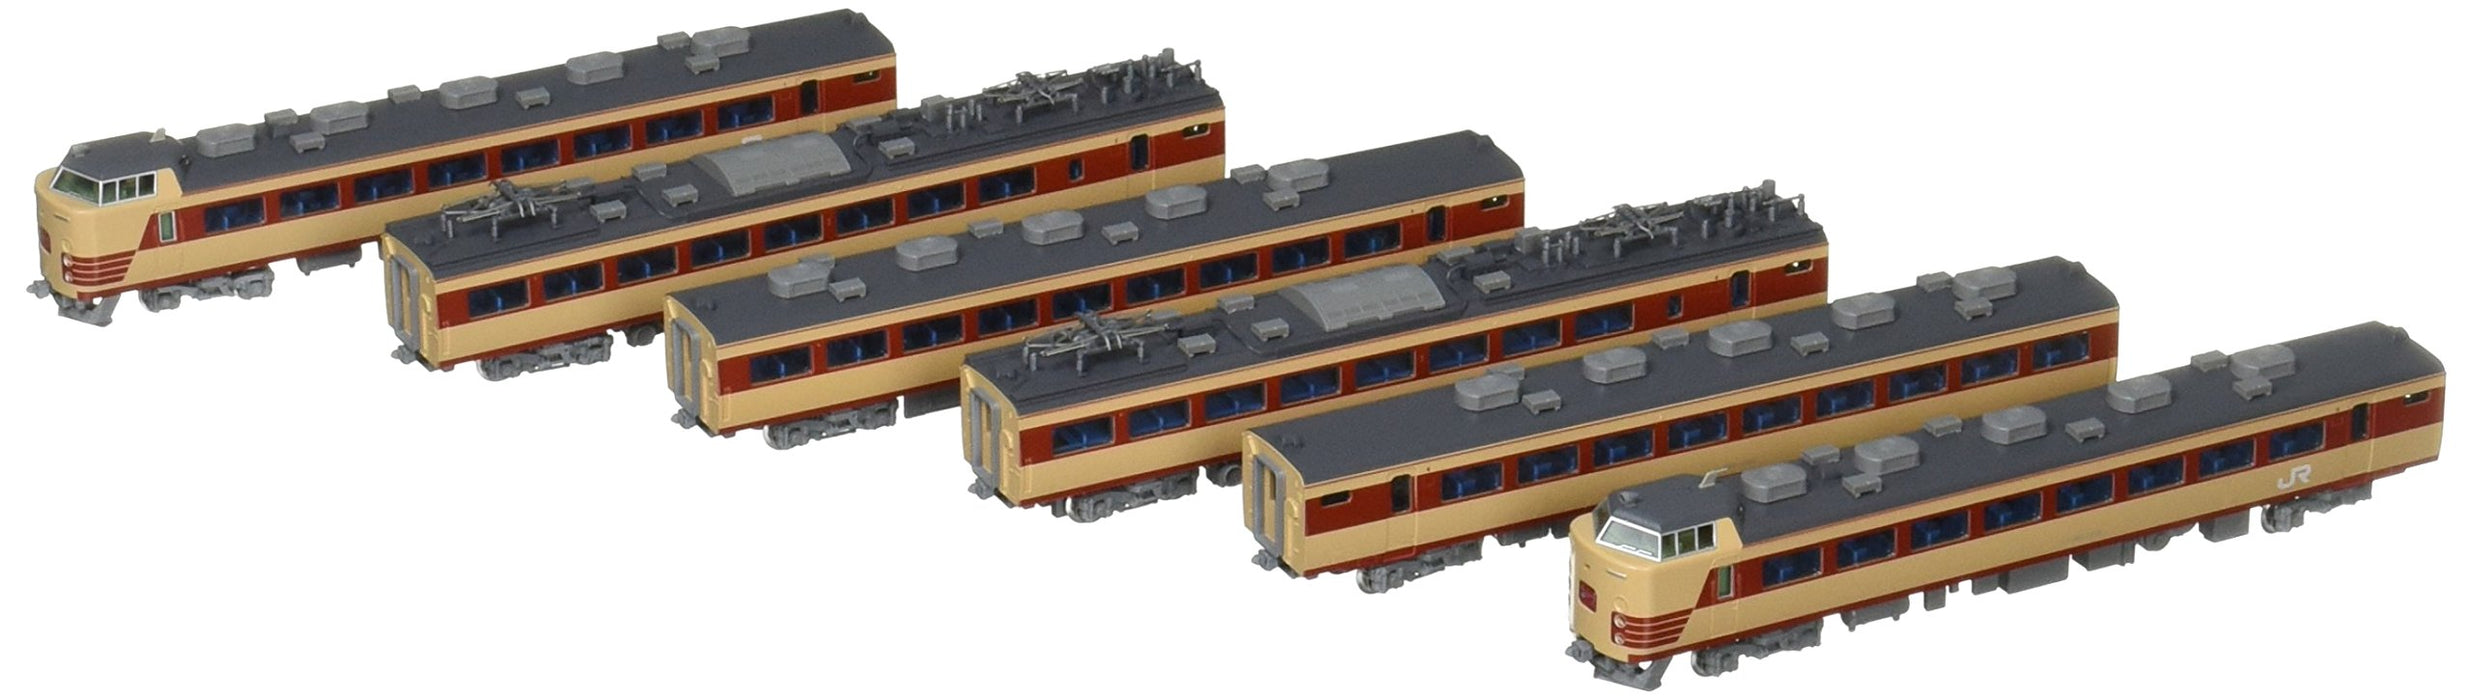 Tomytec Tomix N Gauge 485 Series A1 A2 Formation Set - Limited Edition Model Train